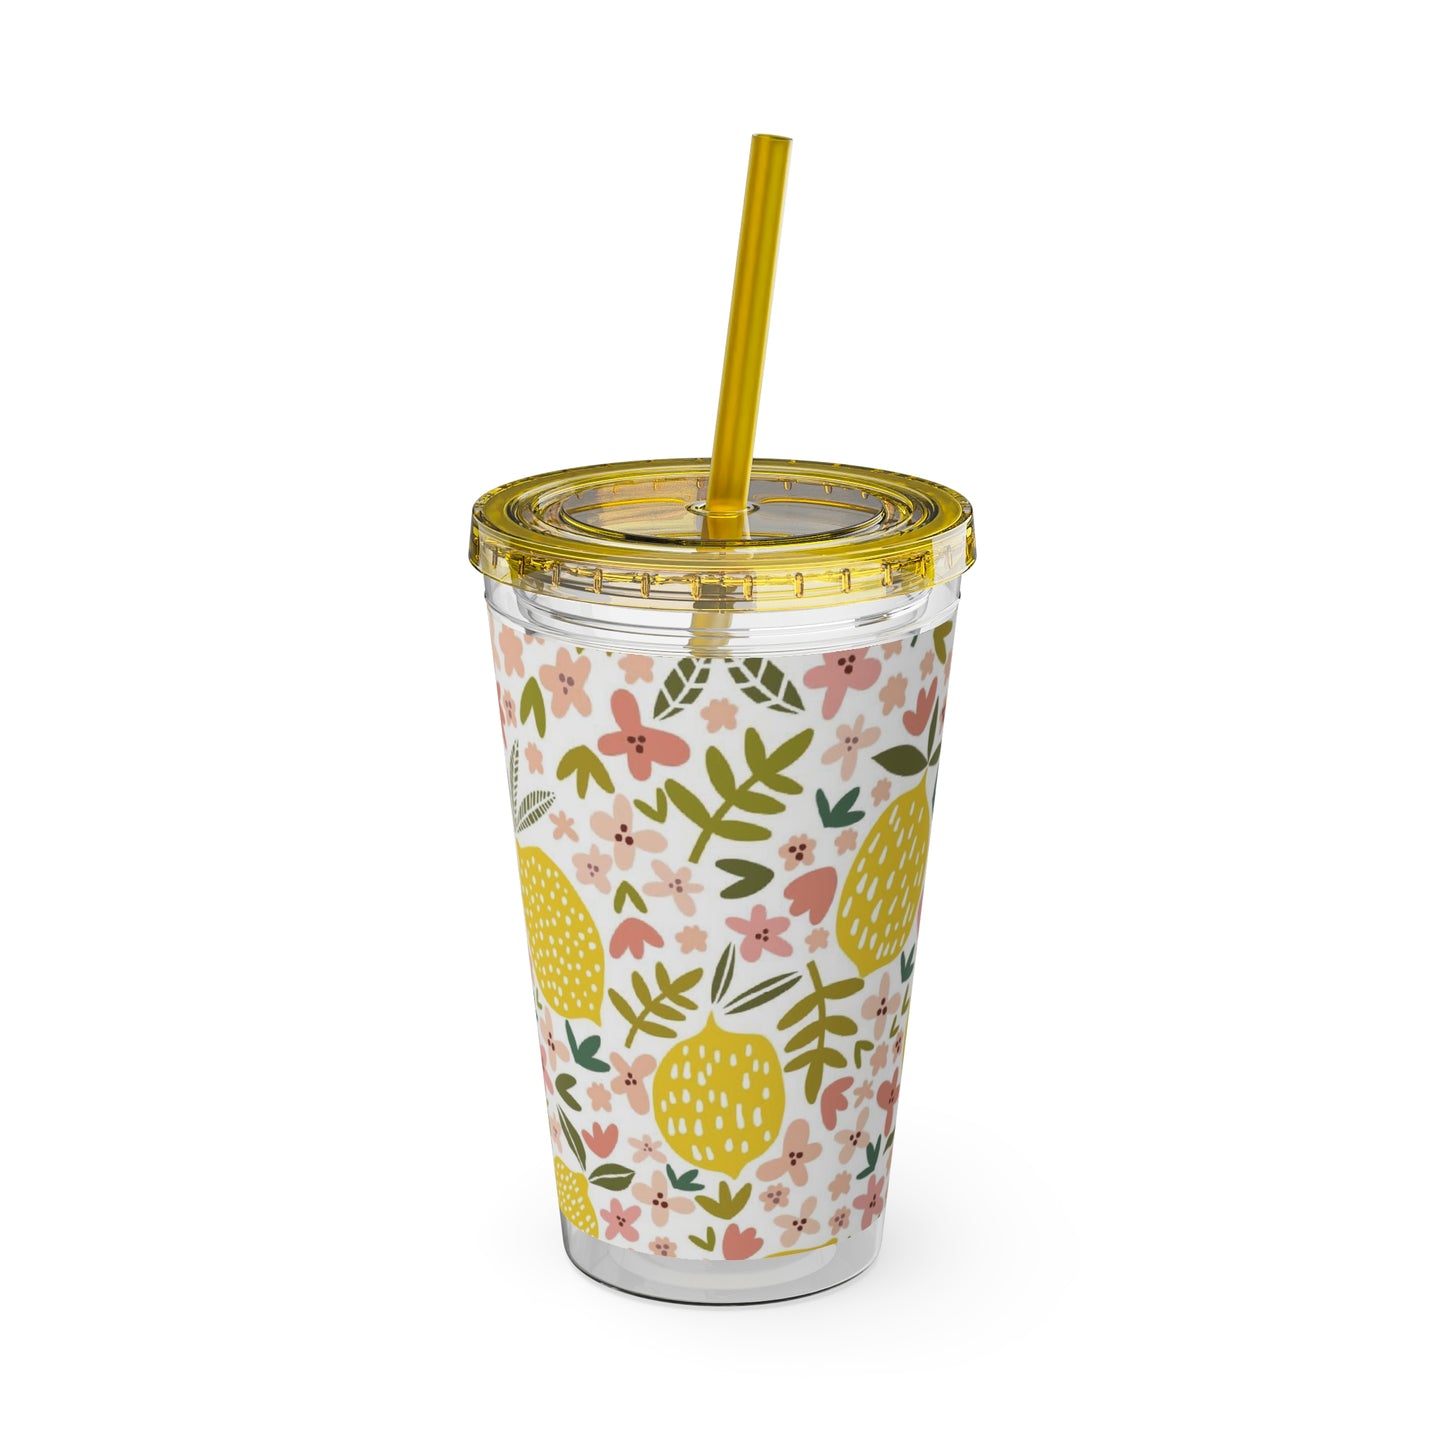 A Printify 16 oz. BPA-free Pink Lemons Tumbler with a yellow straw and floral pattern.